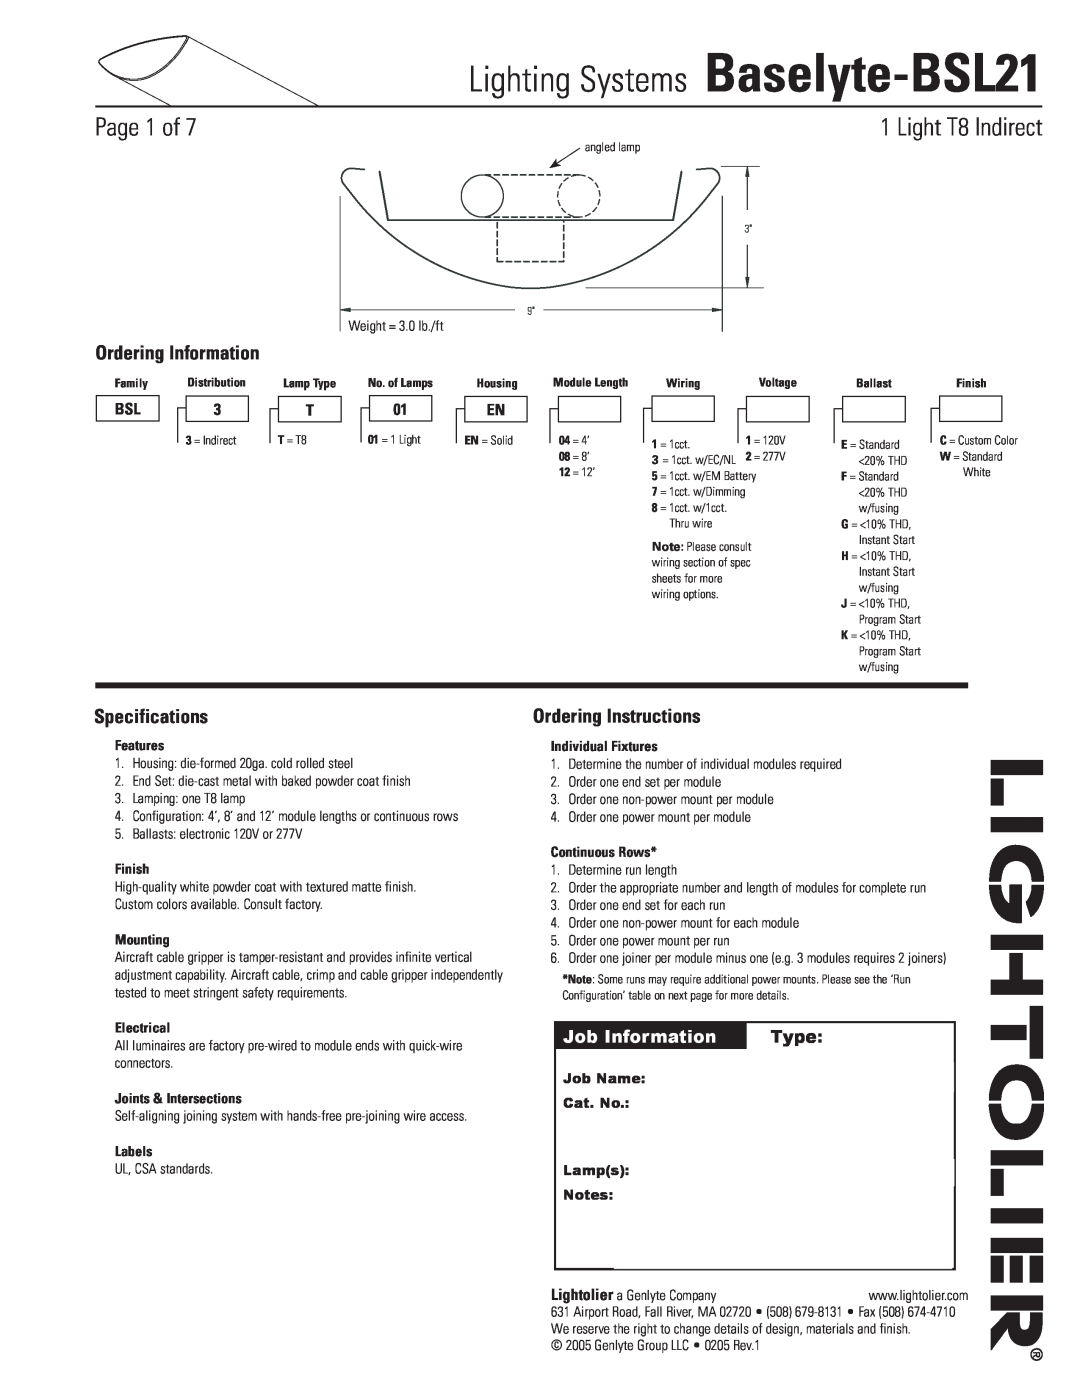 Lightolier specifications Lighting Systems Baselyte-BSL21, Page  of,  Light T8 Indirect, Ordering Information, Type 